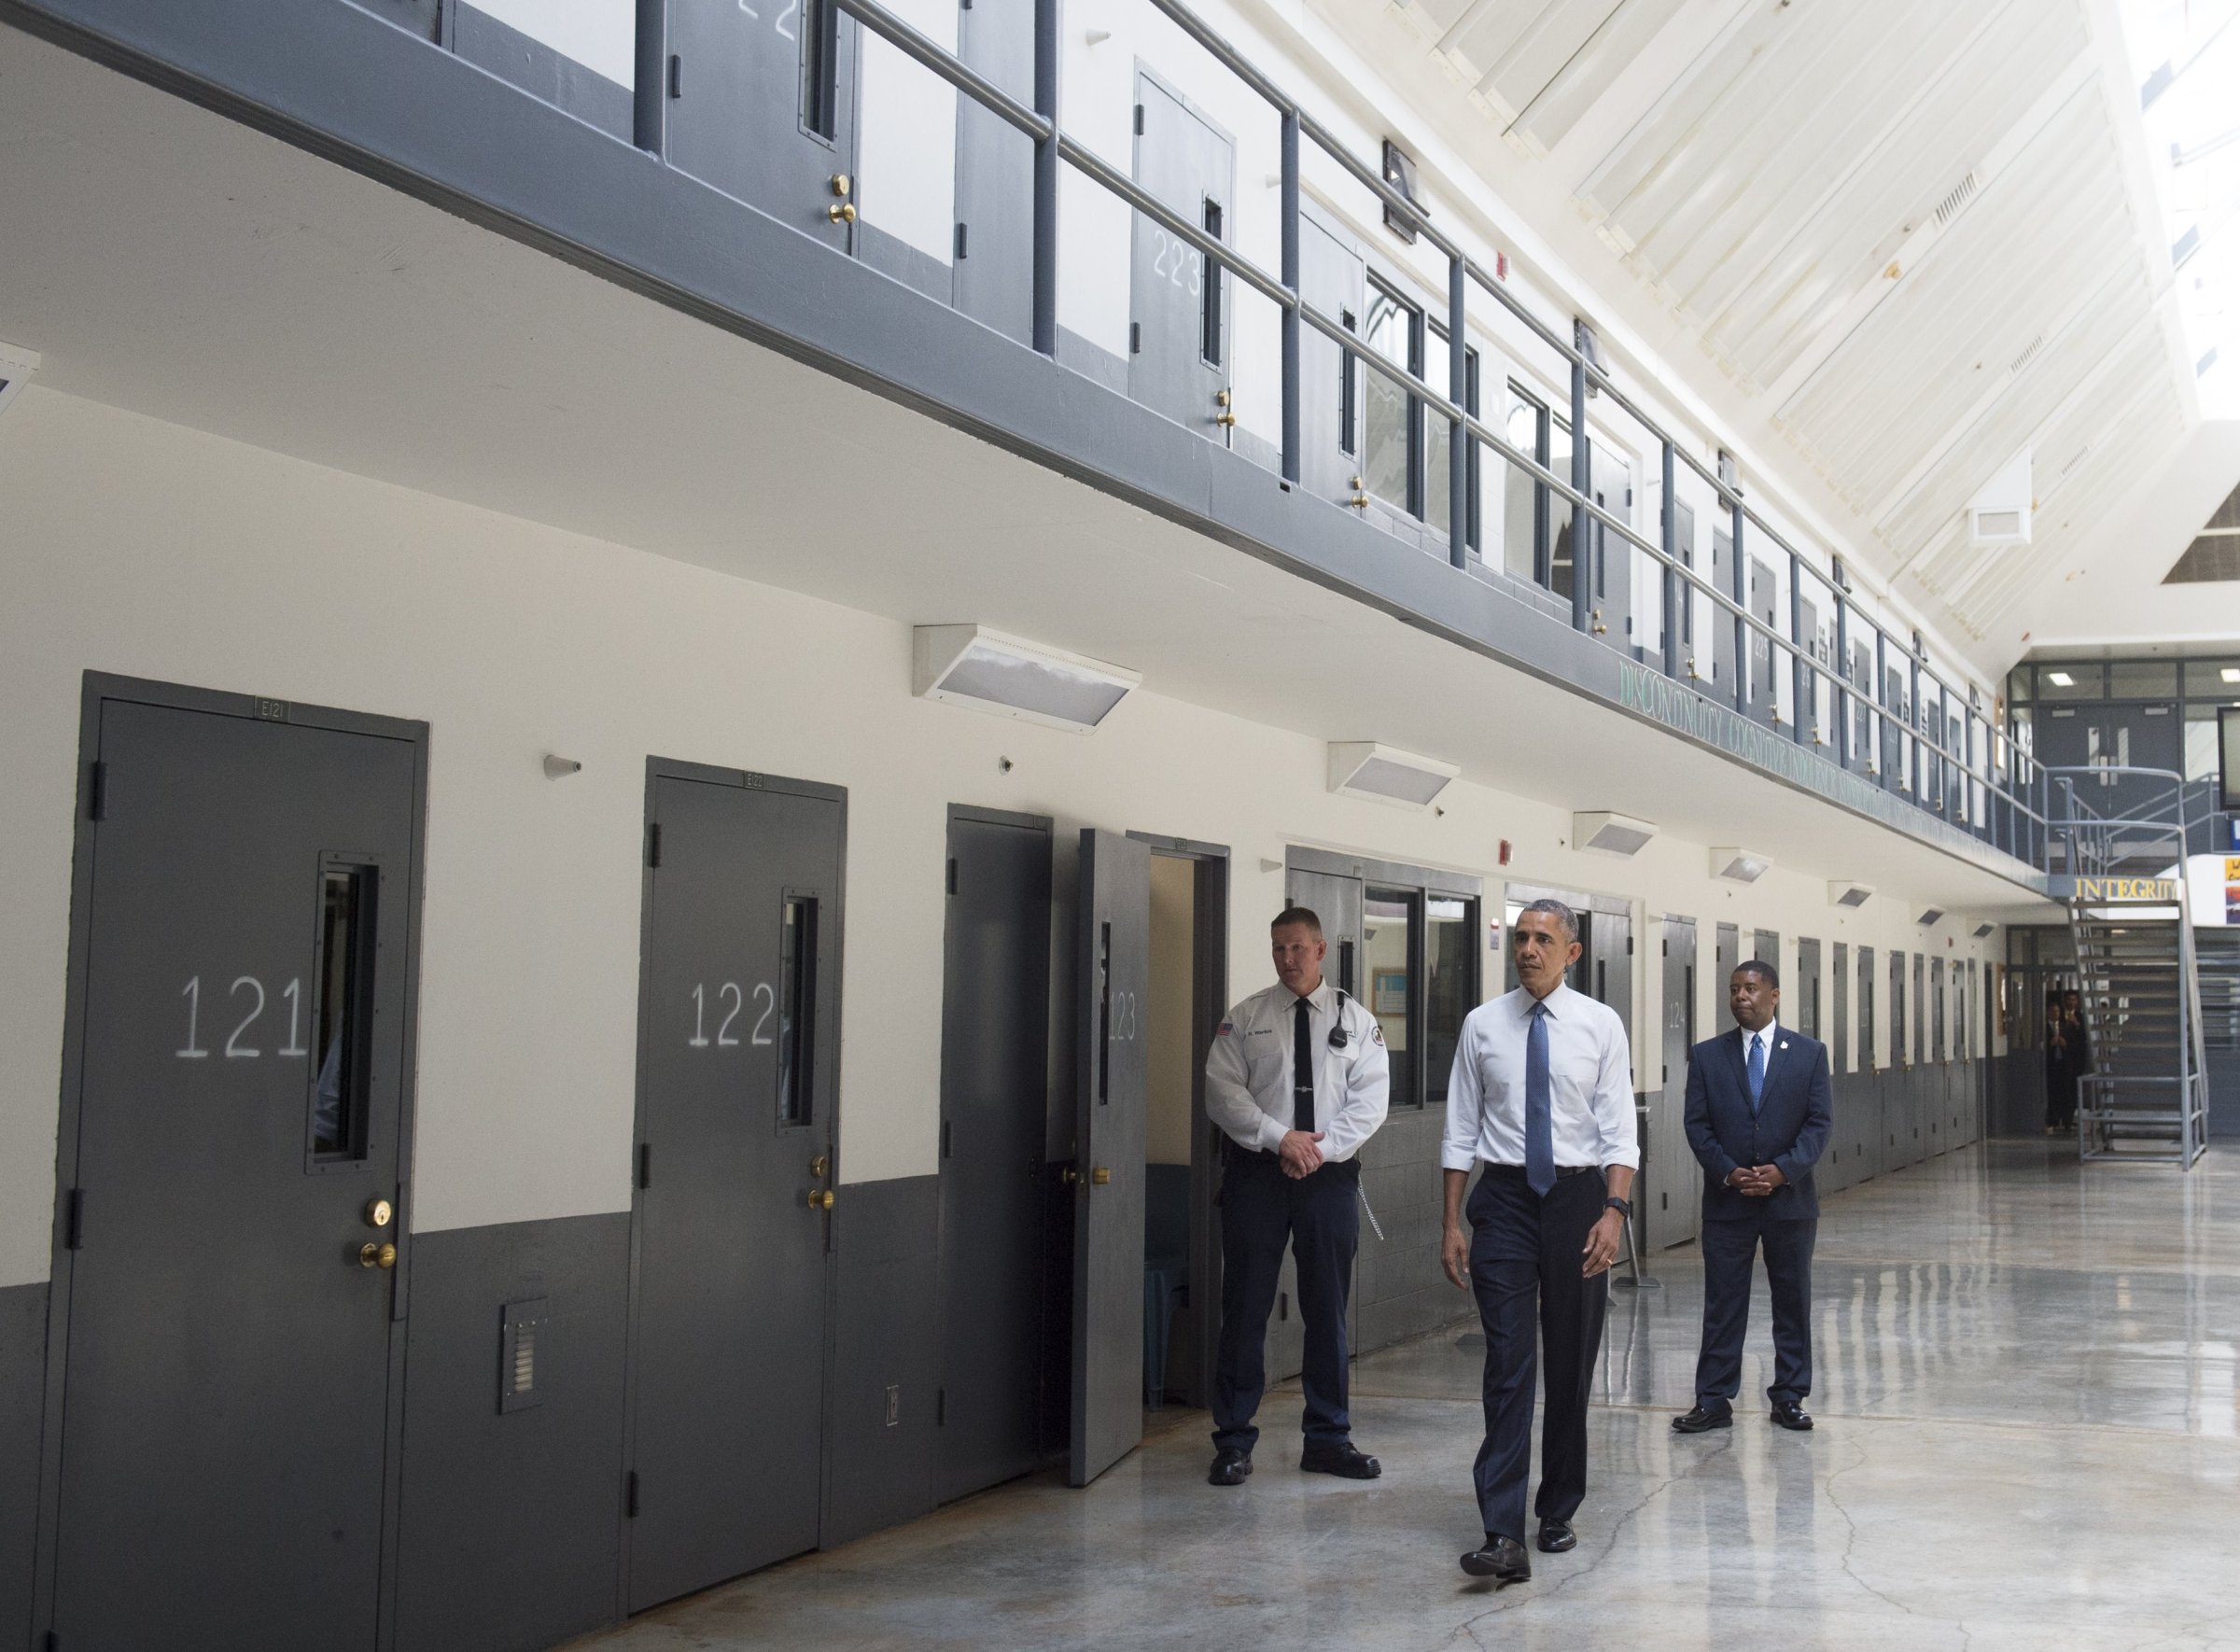 Barack Obama, alongside Charles Samuels (R), Bureau of Prisons Director, and Ronald Warlick (L), a correctional officer, tours a cell block at the El Reno Federal Correctional Institution in El Reno, Oklahoma, July 16, 2015.